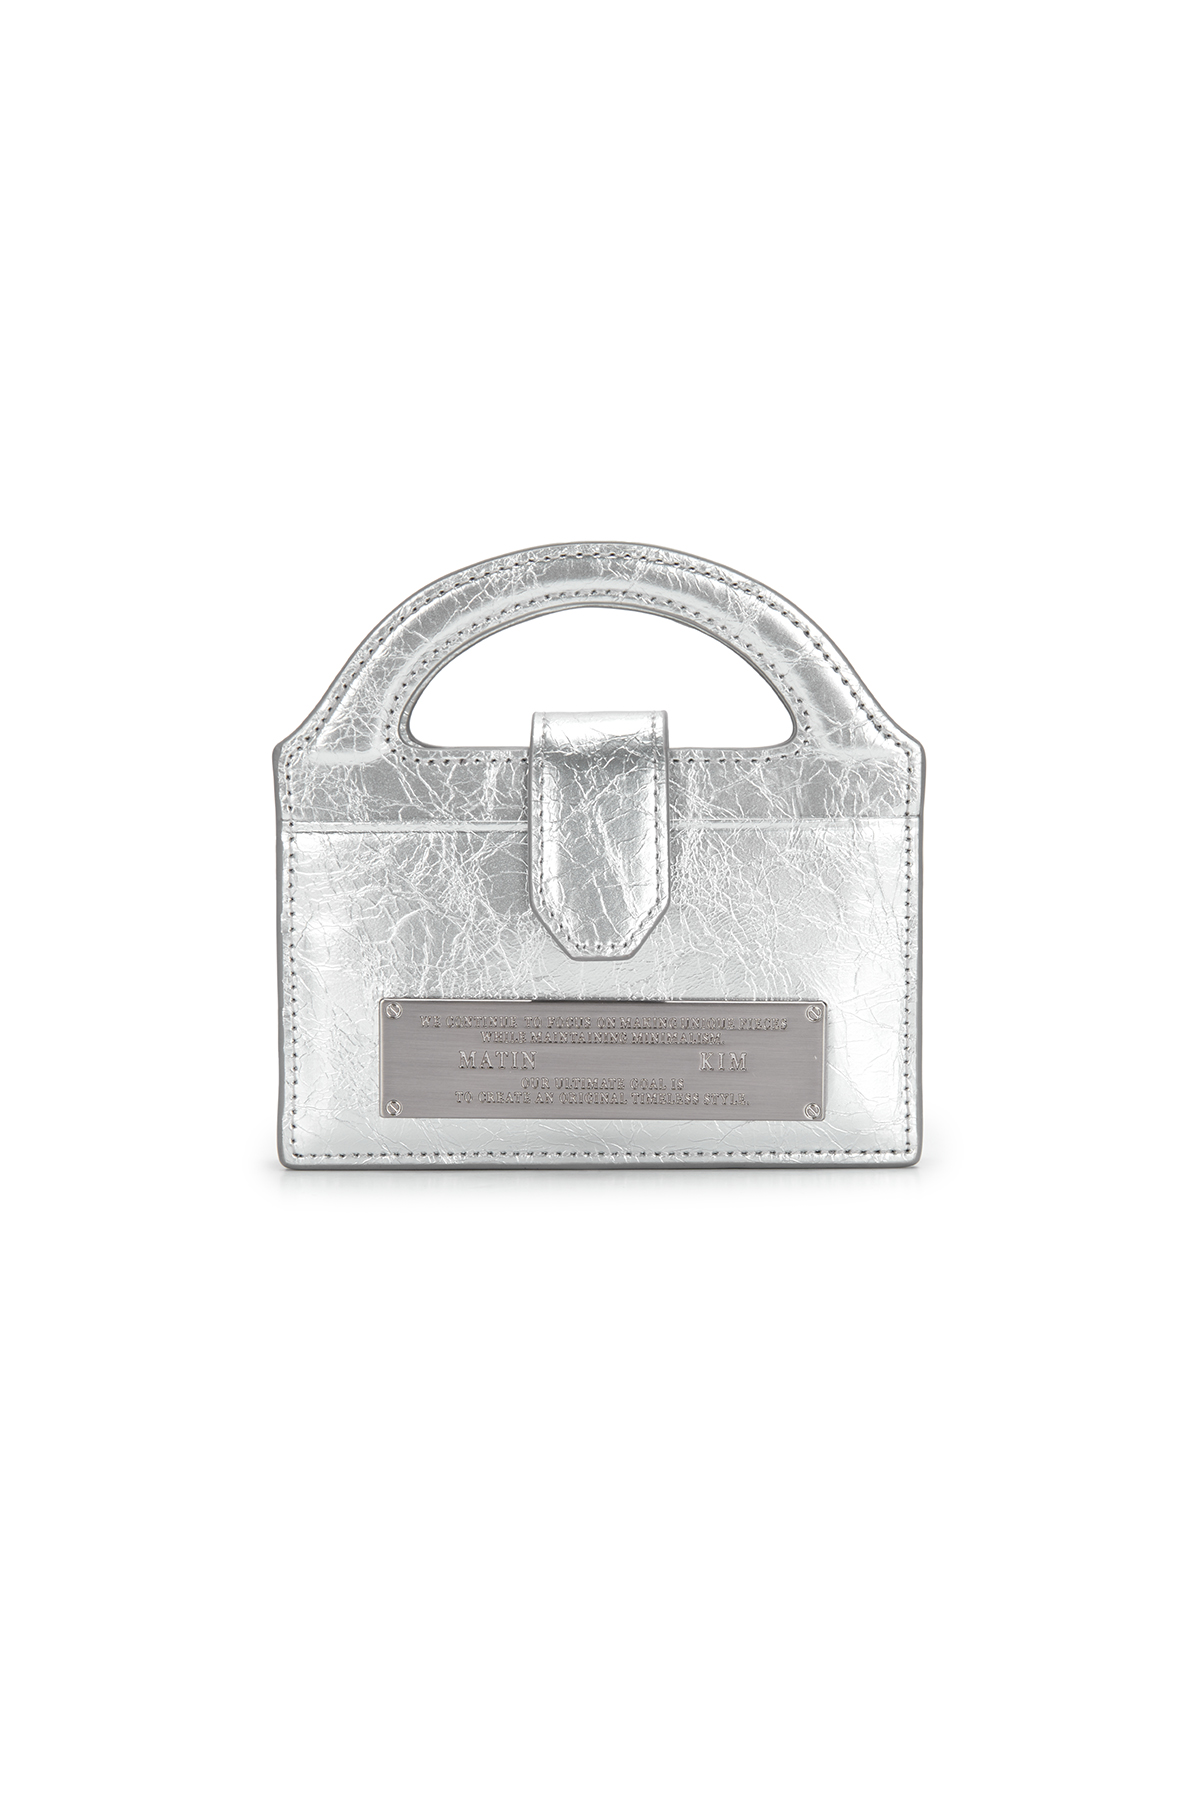 HANDLE ACCORDION CHAIN WALLET IN SILVER